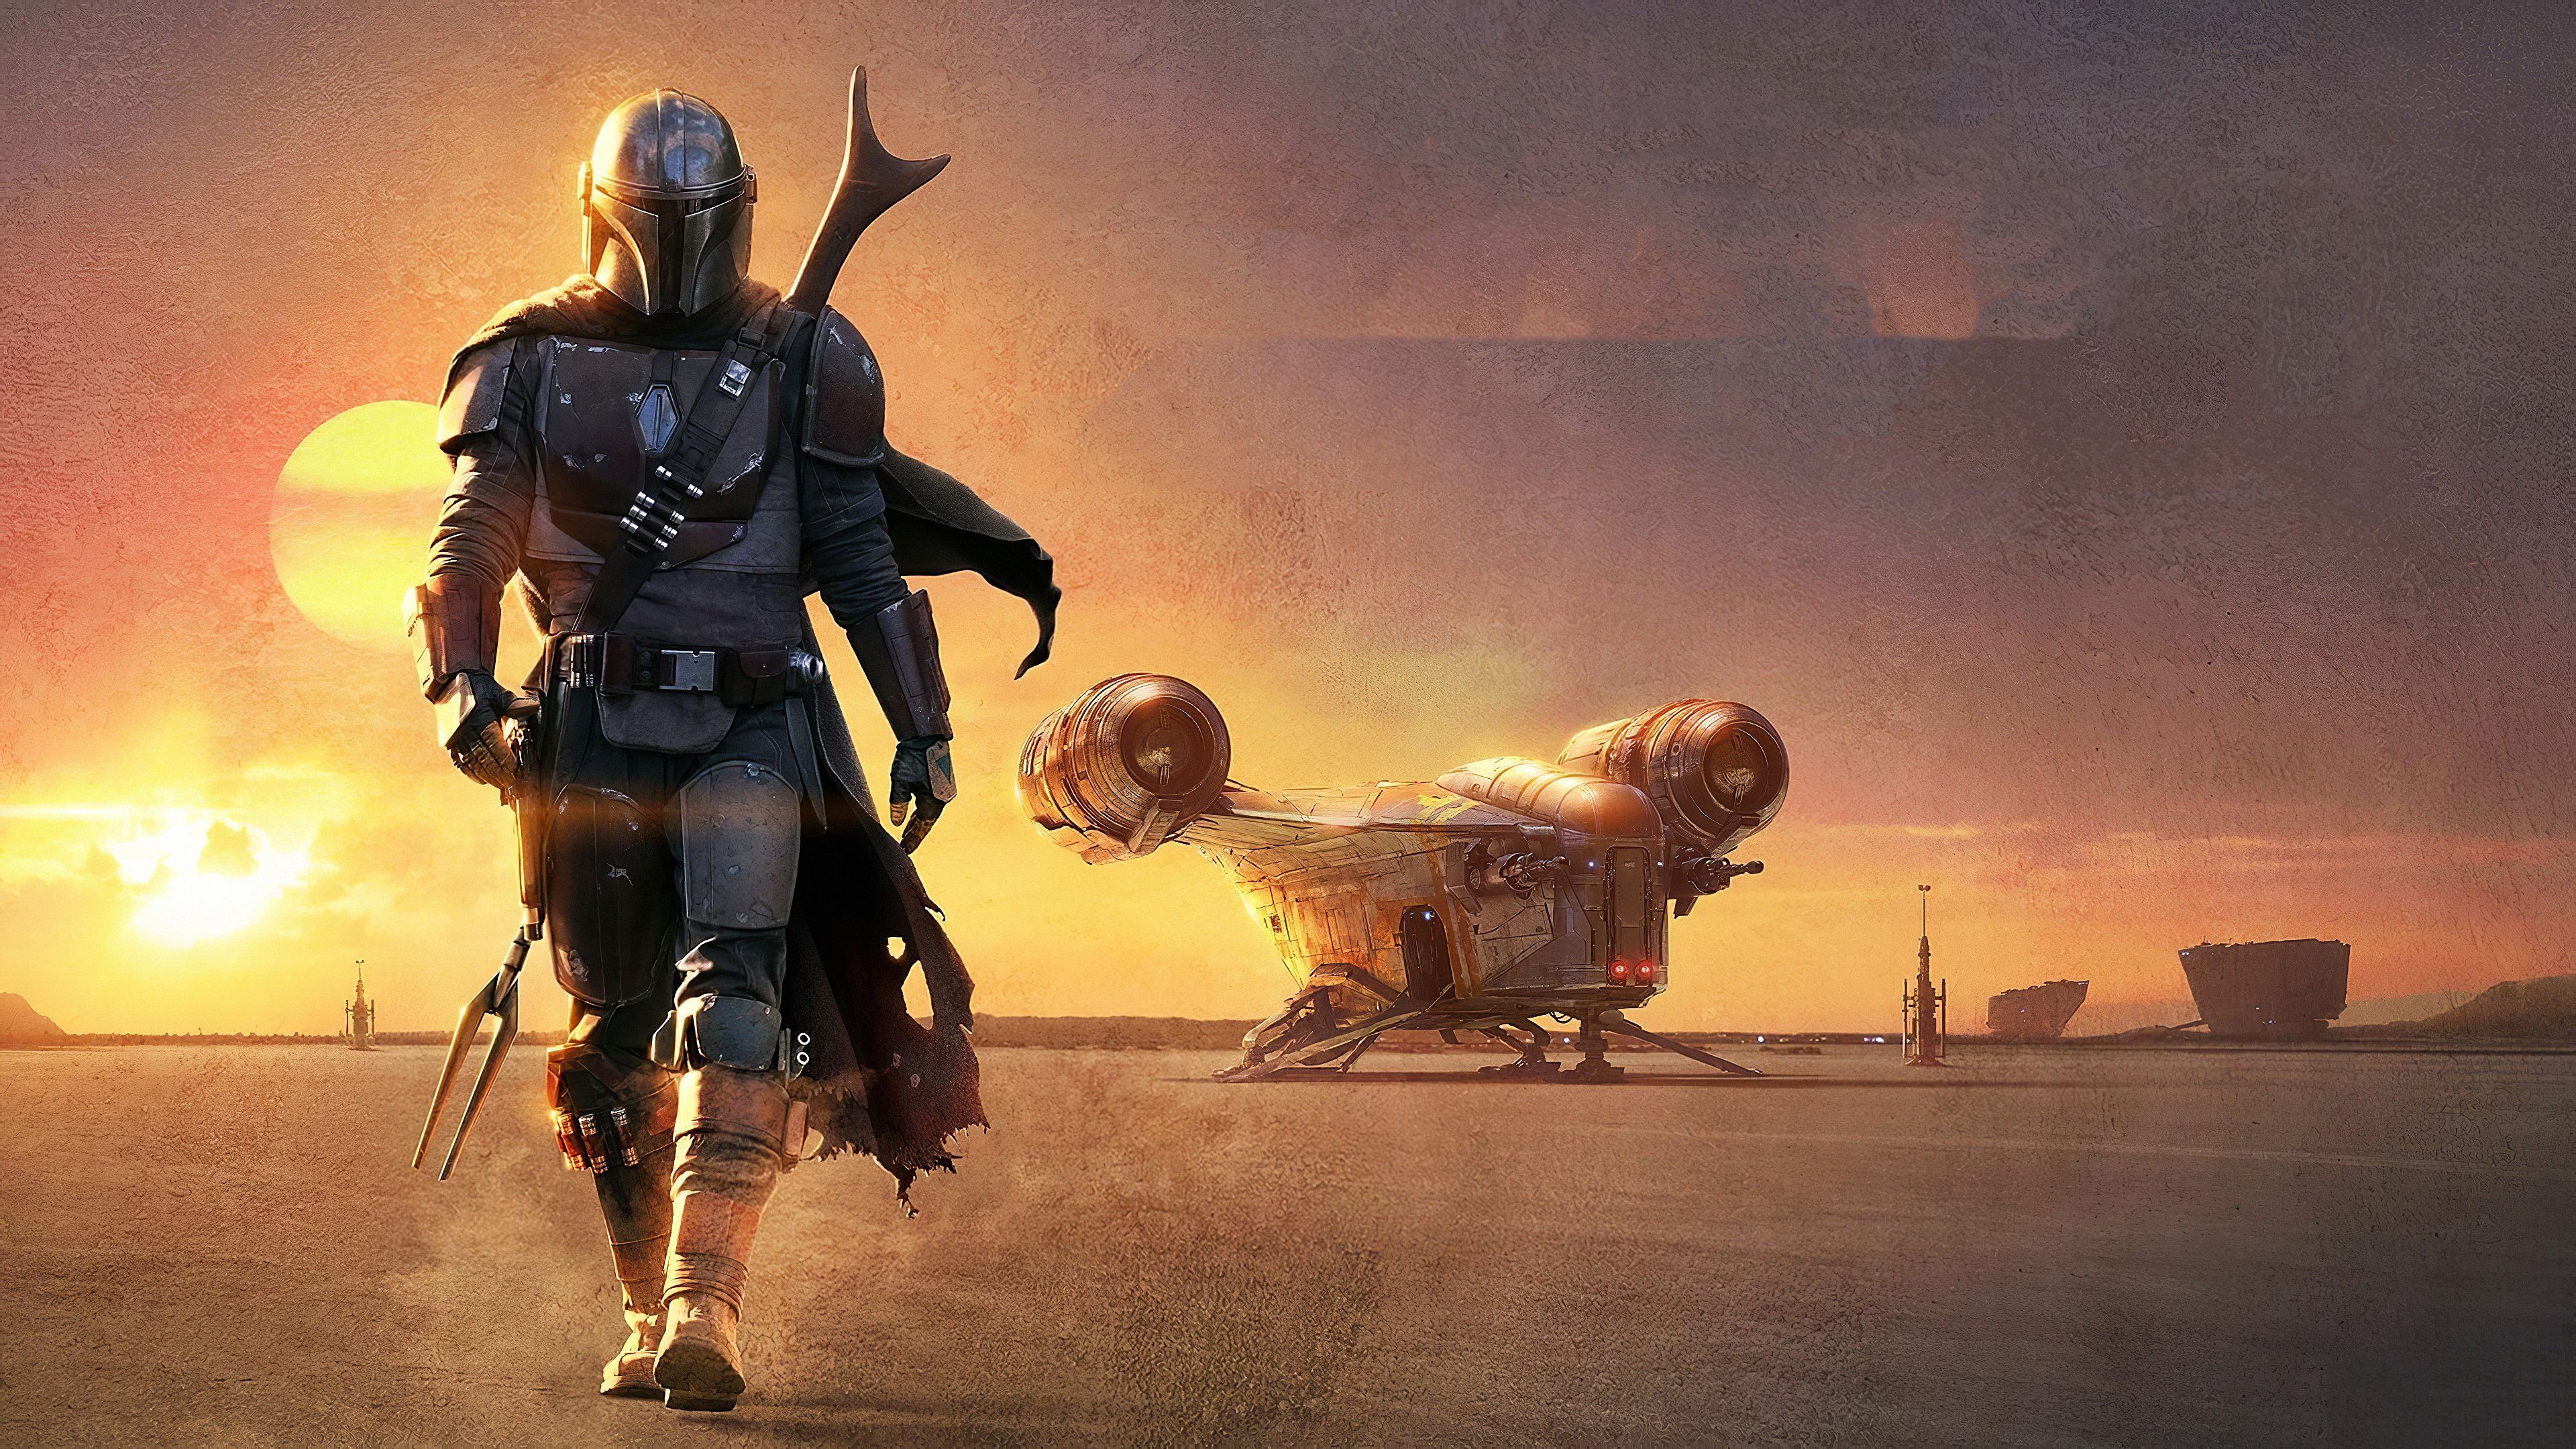 The Mandalorian Tv Series 4k 2020, HD Tv Shows, 4k Wallpapers, Image, Backgrounds, Photos and Pictures